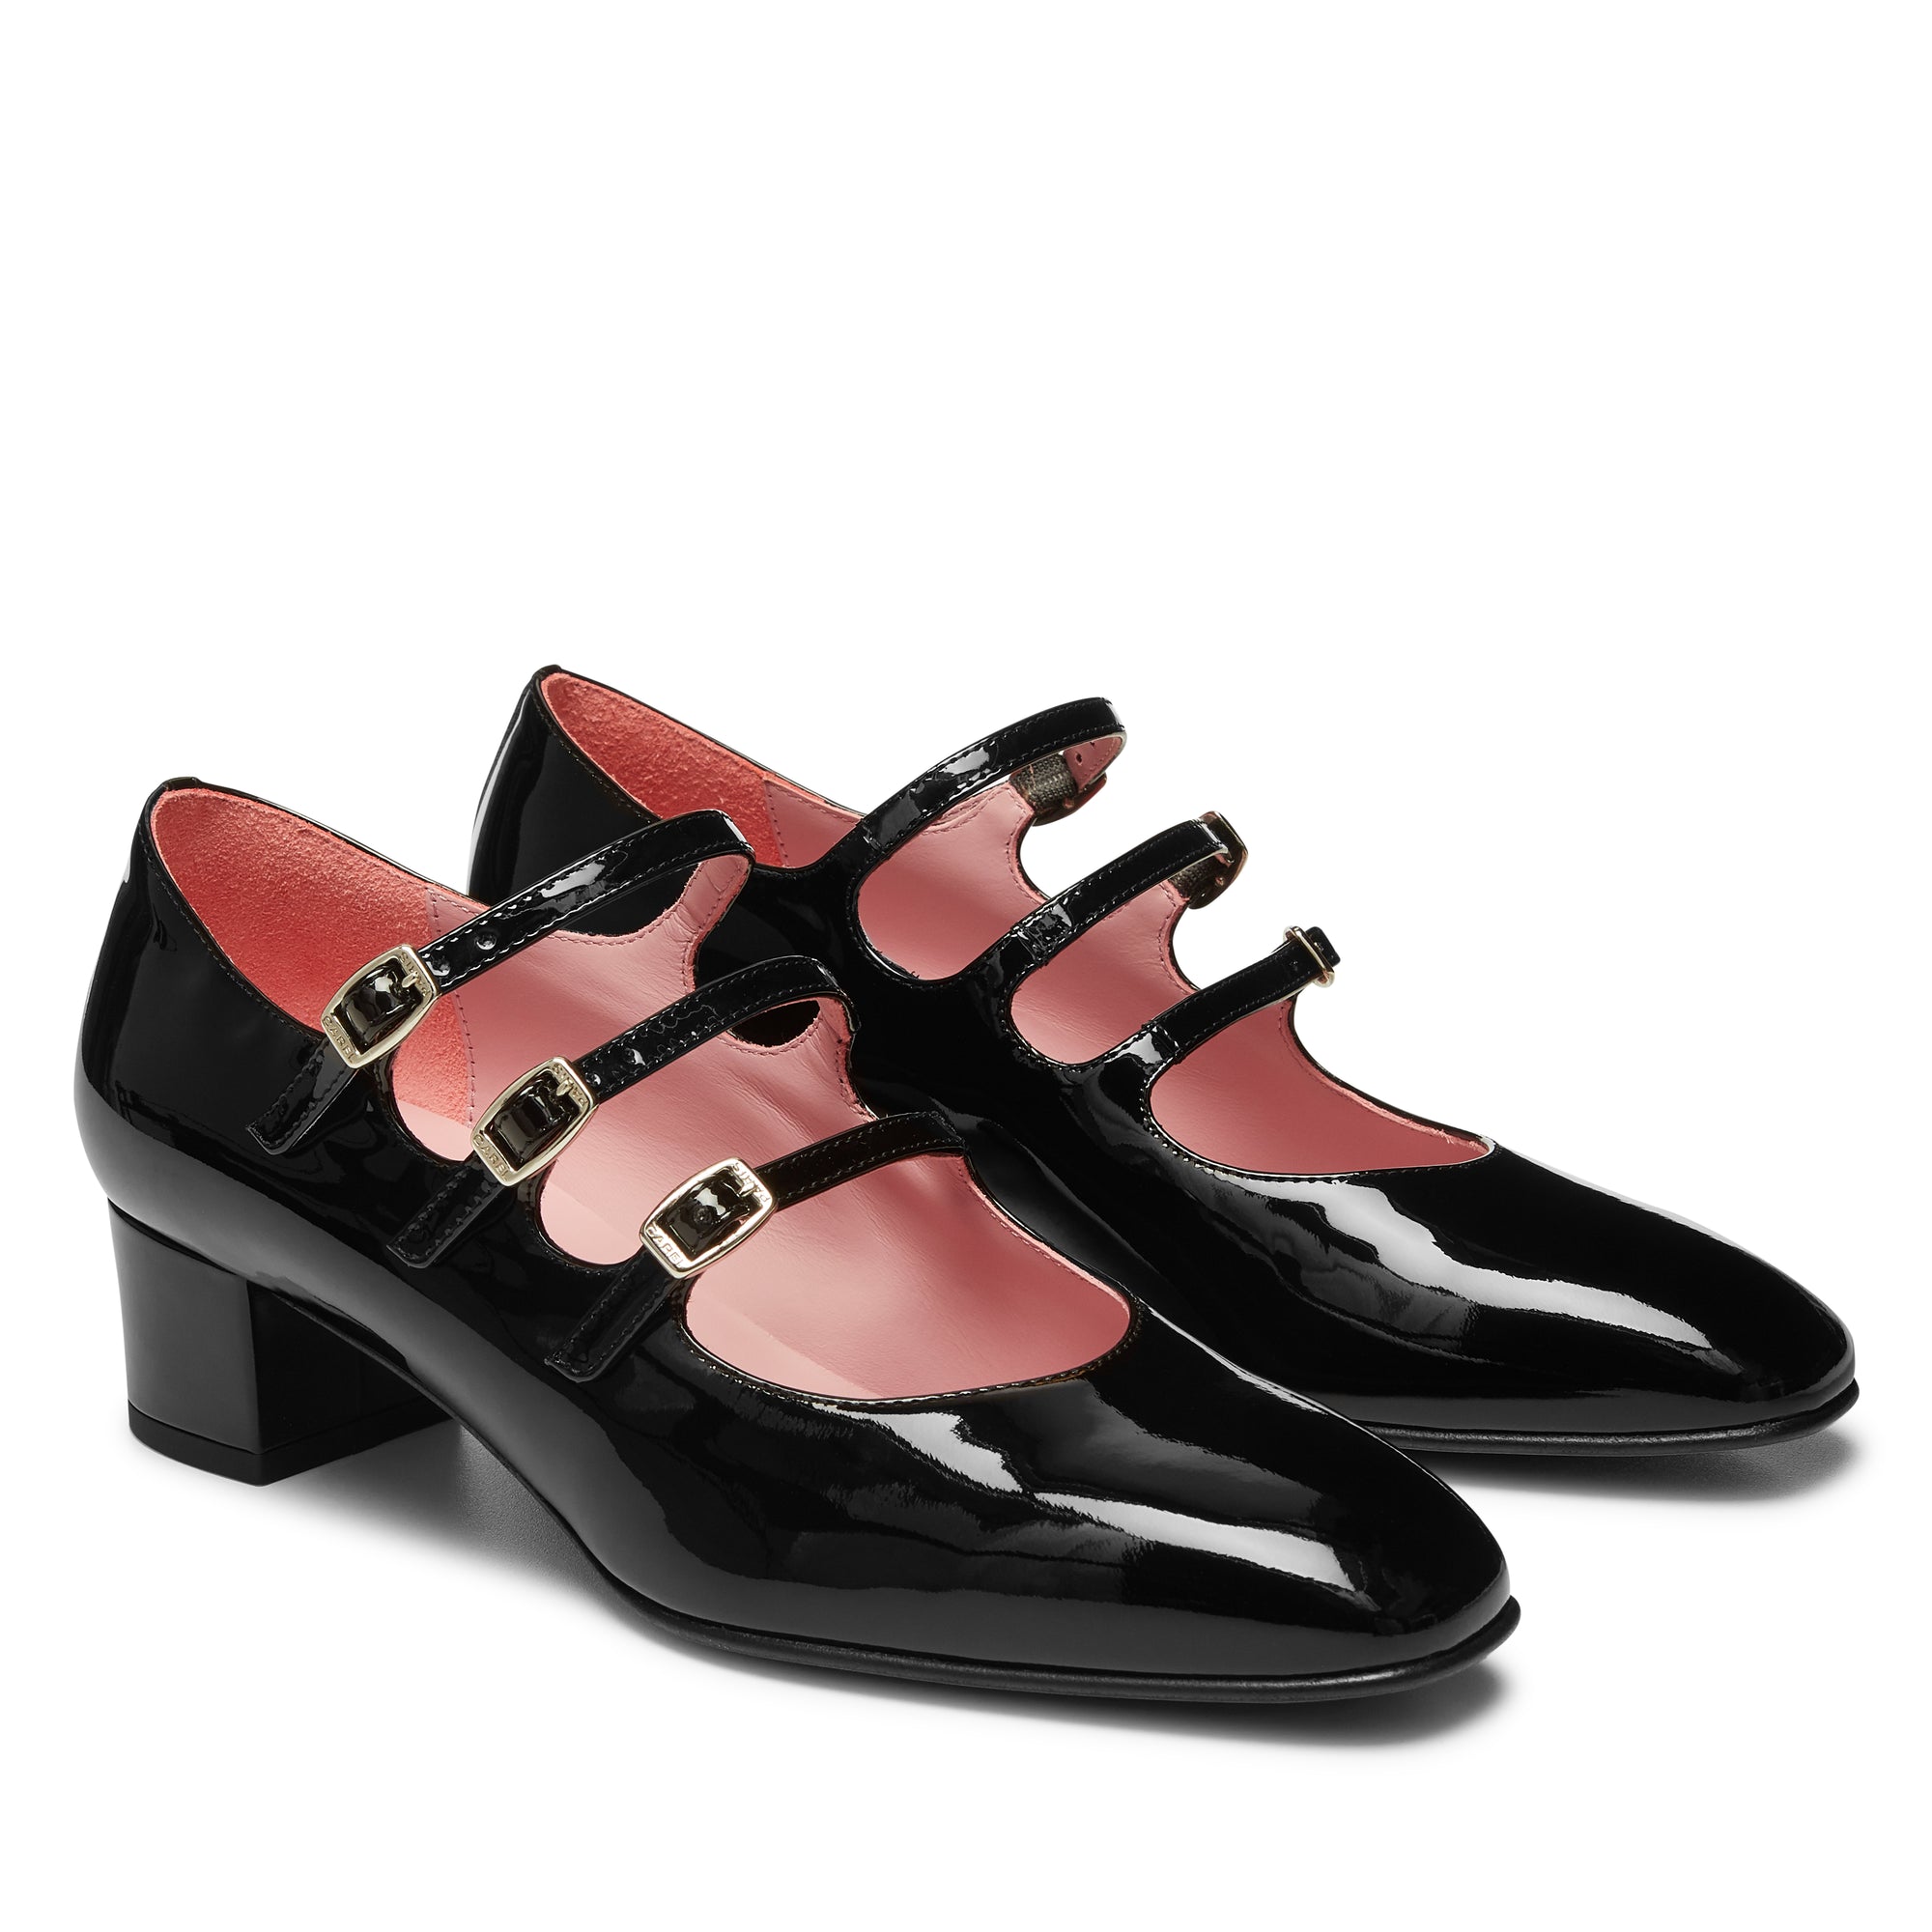 KINA black patent leather Mary Janes pumps